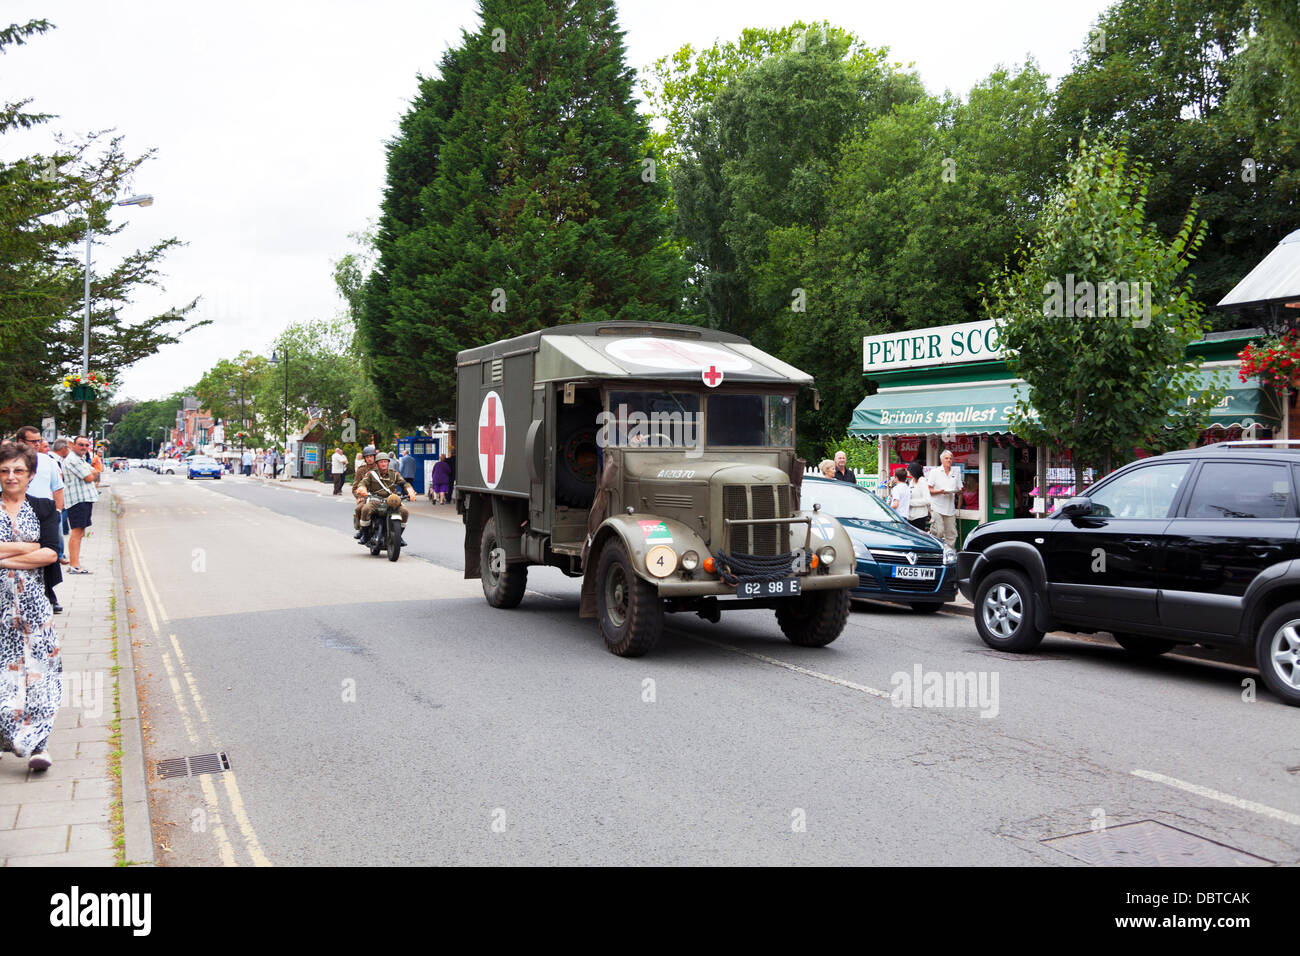 Woodhall Spa. 4th August, 2013. Woodhall Spa 1940's weekend 4/08/2013 Lincolnshire Village UK England. British army ambulance speeding down road  traditional 1940's war time outfits of the era along with war vehicles and cars Credit:  Paul Thompson Live News/Alamy Live News Stock Photo